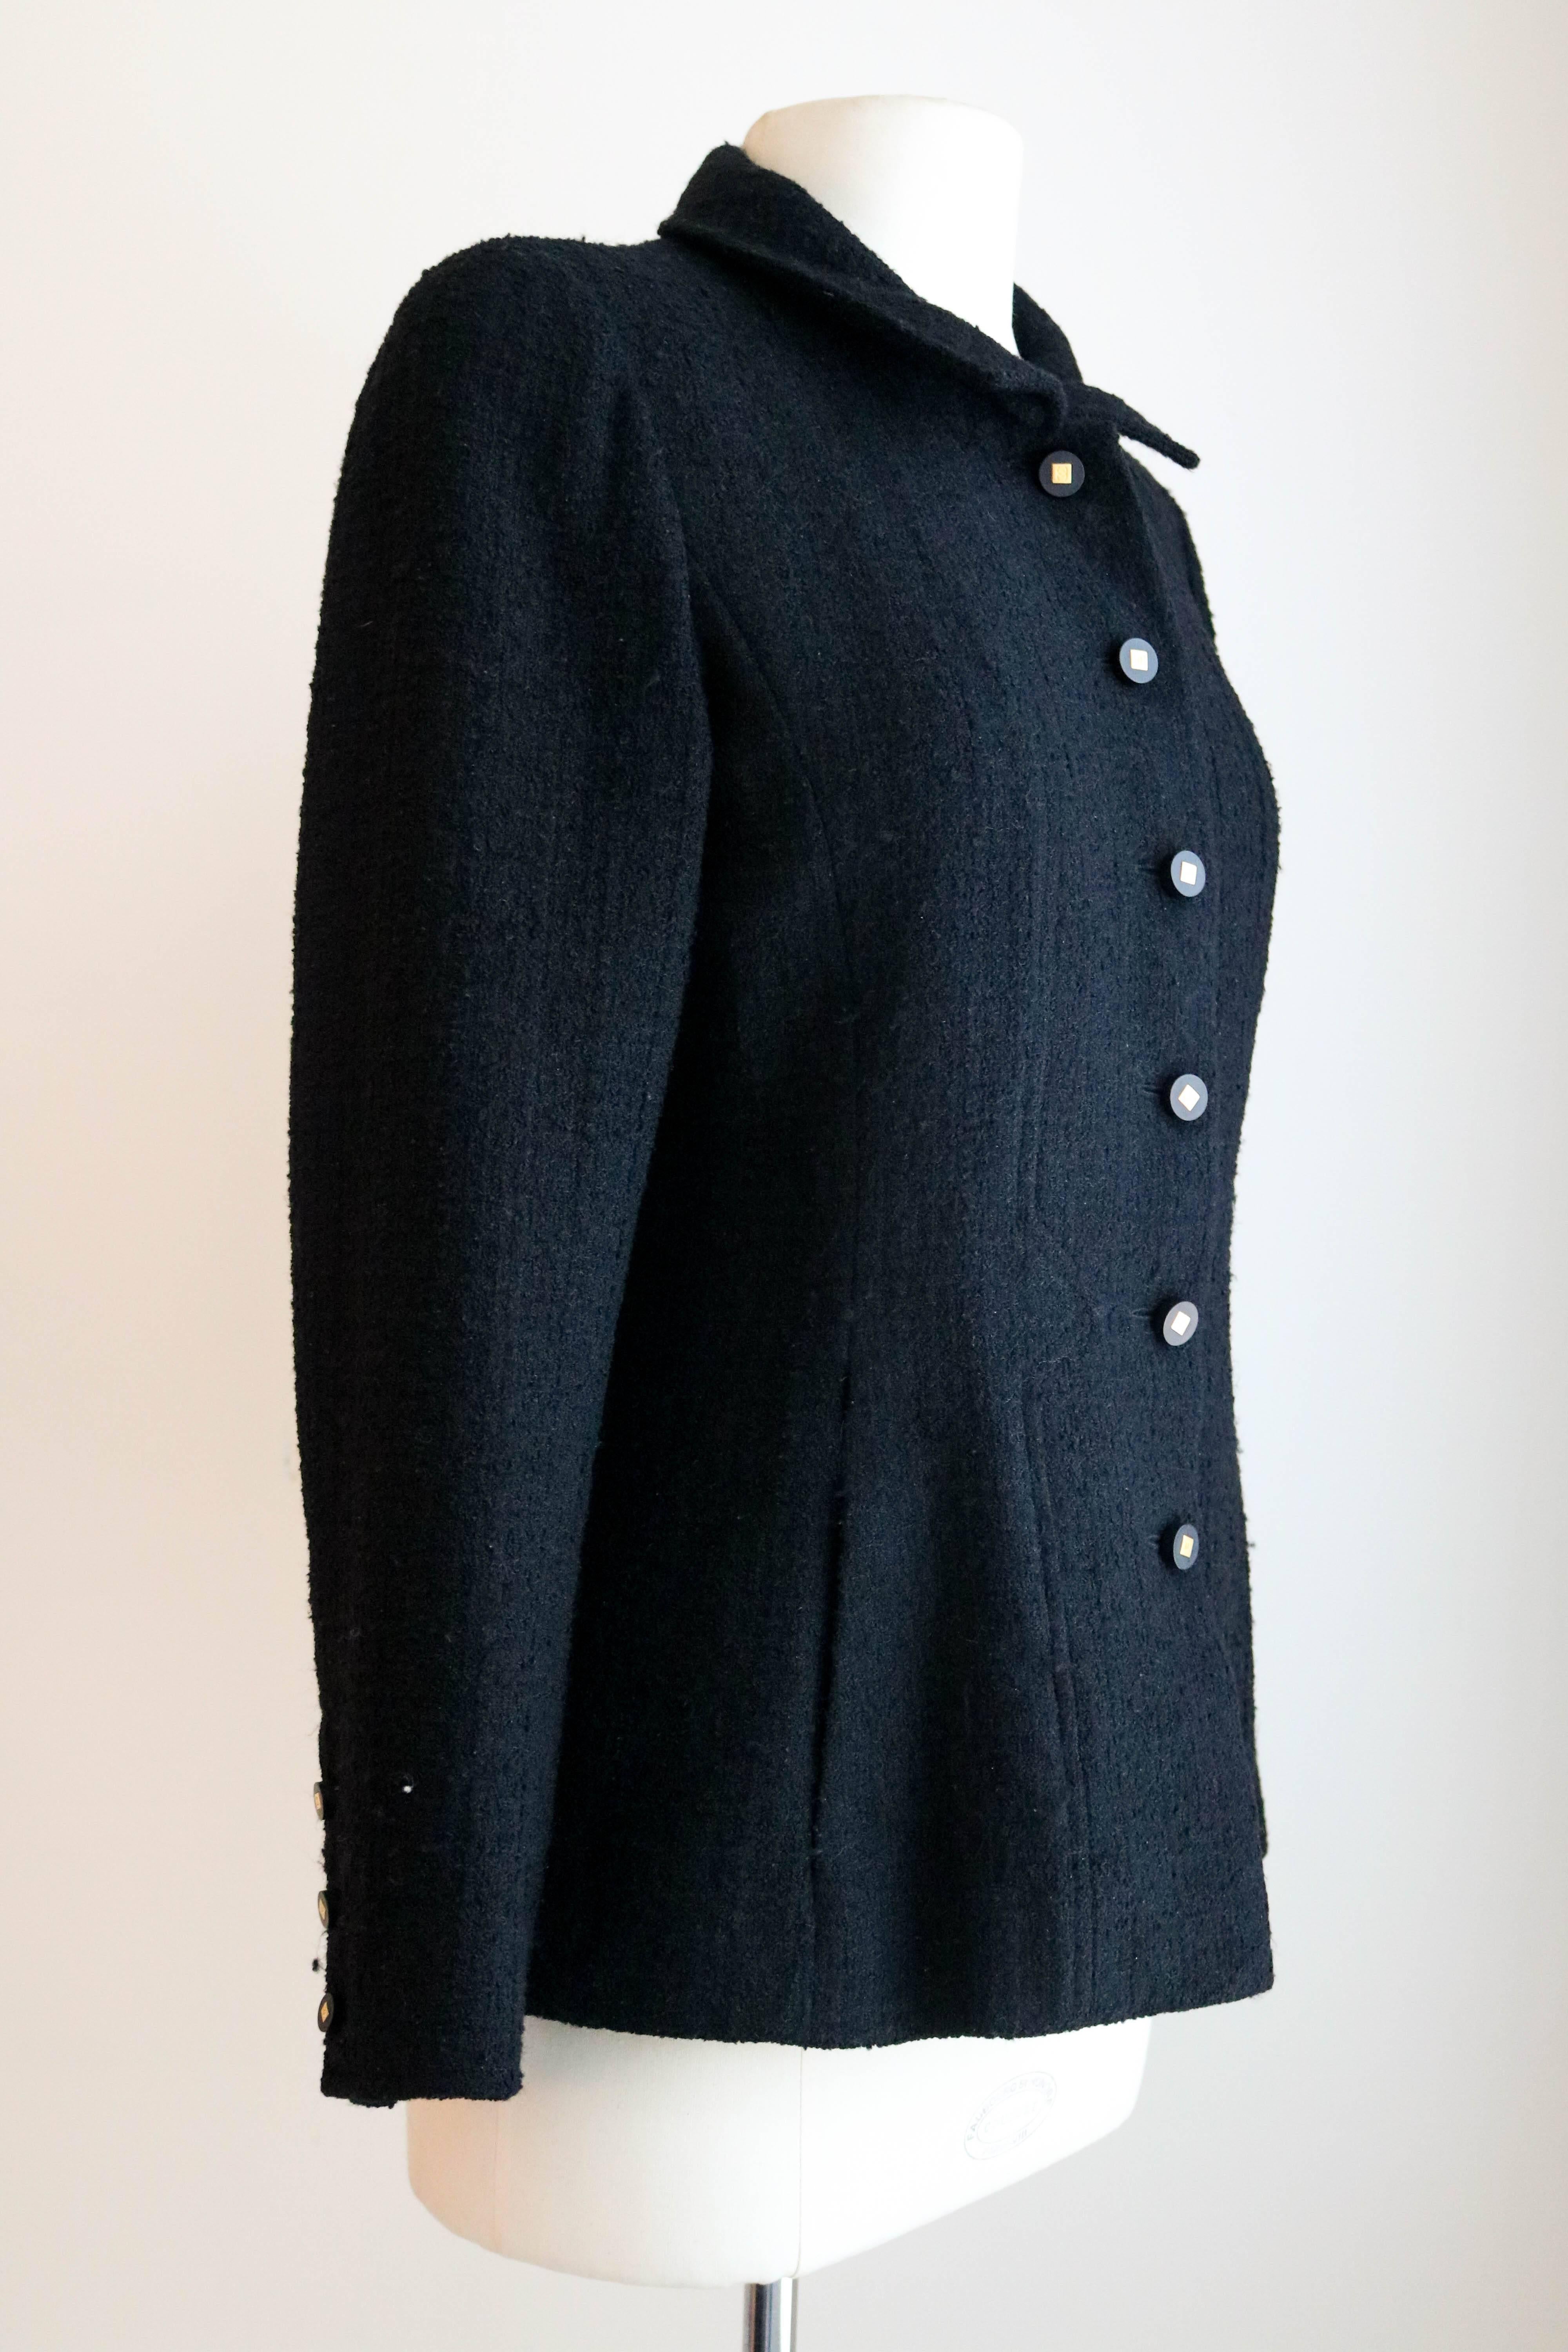 Offered is a Chanel classic black boucle blazer with logo buttons.  Six buttons on front closure and three on the sleeves.  Simple single collar.  Abstract stitch details,  and two slip pockets. Silk lining.  Size based on fit model is 38. 